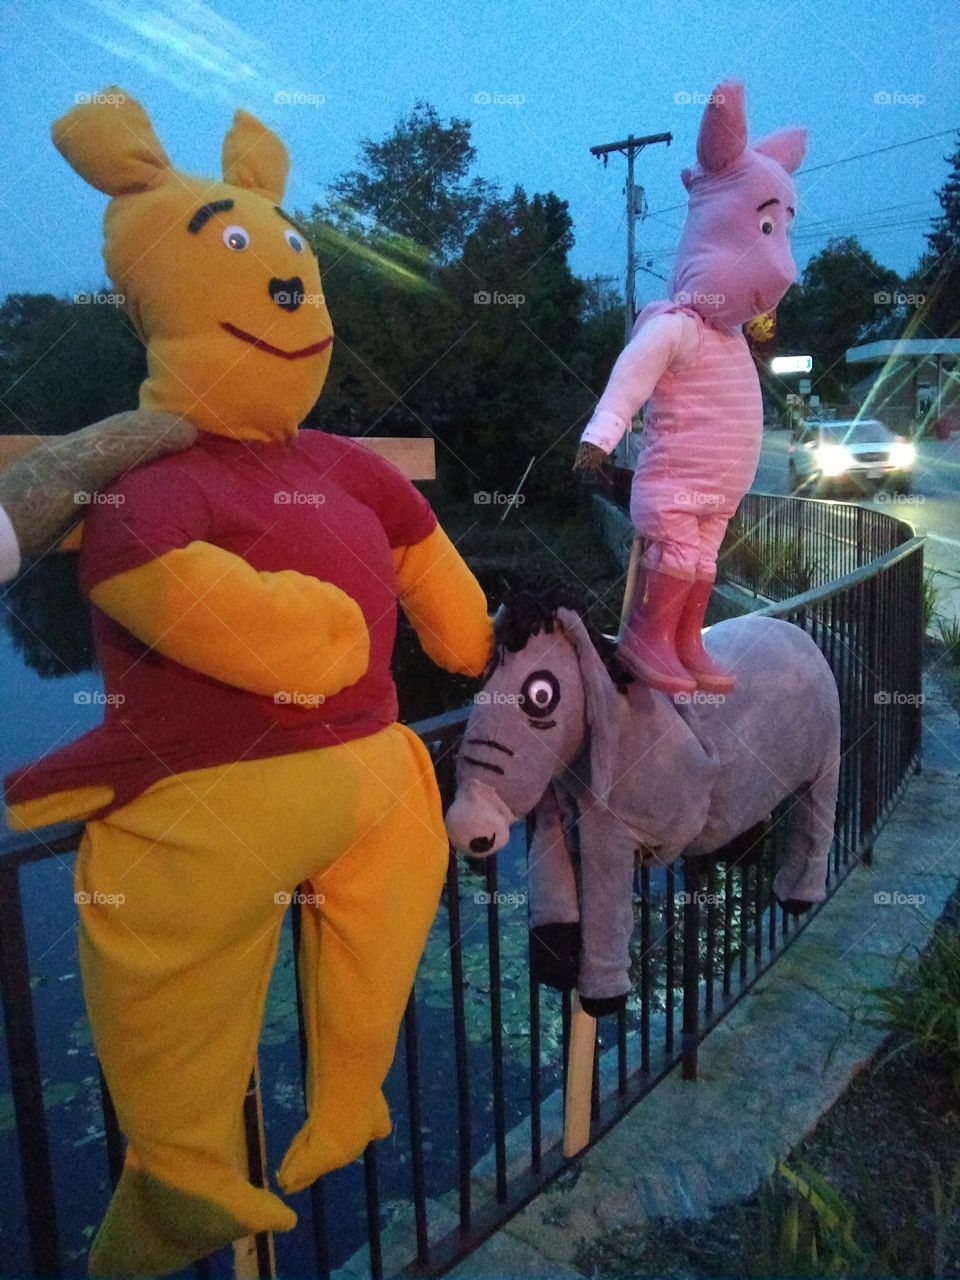 Pooh and Pal out on the town